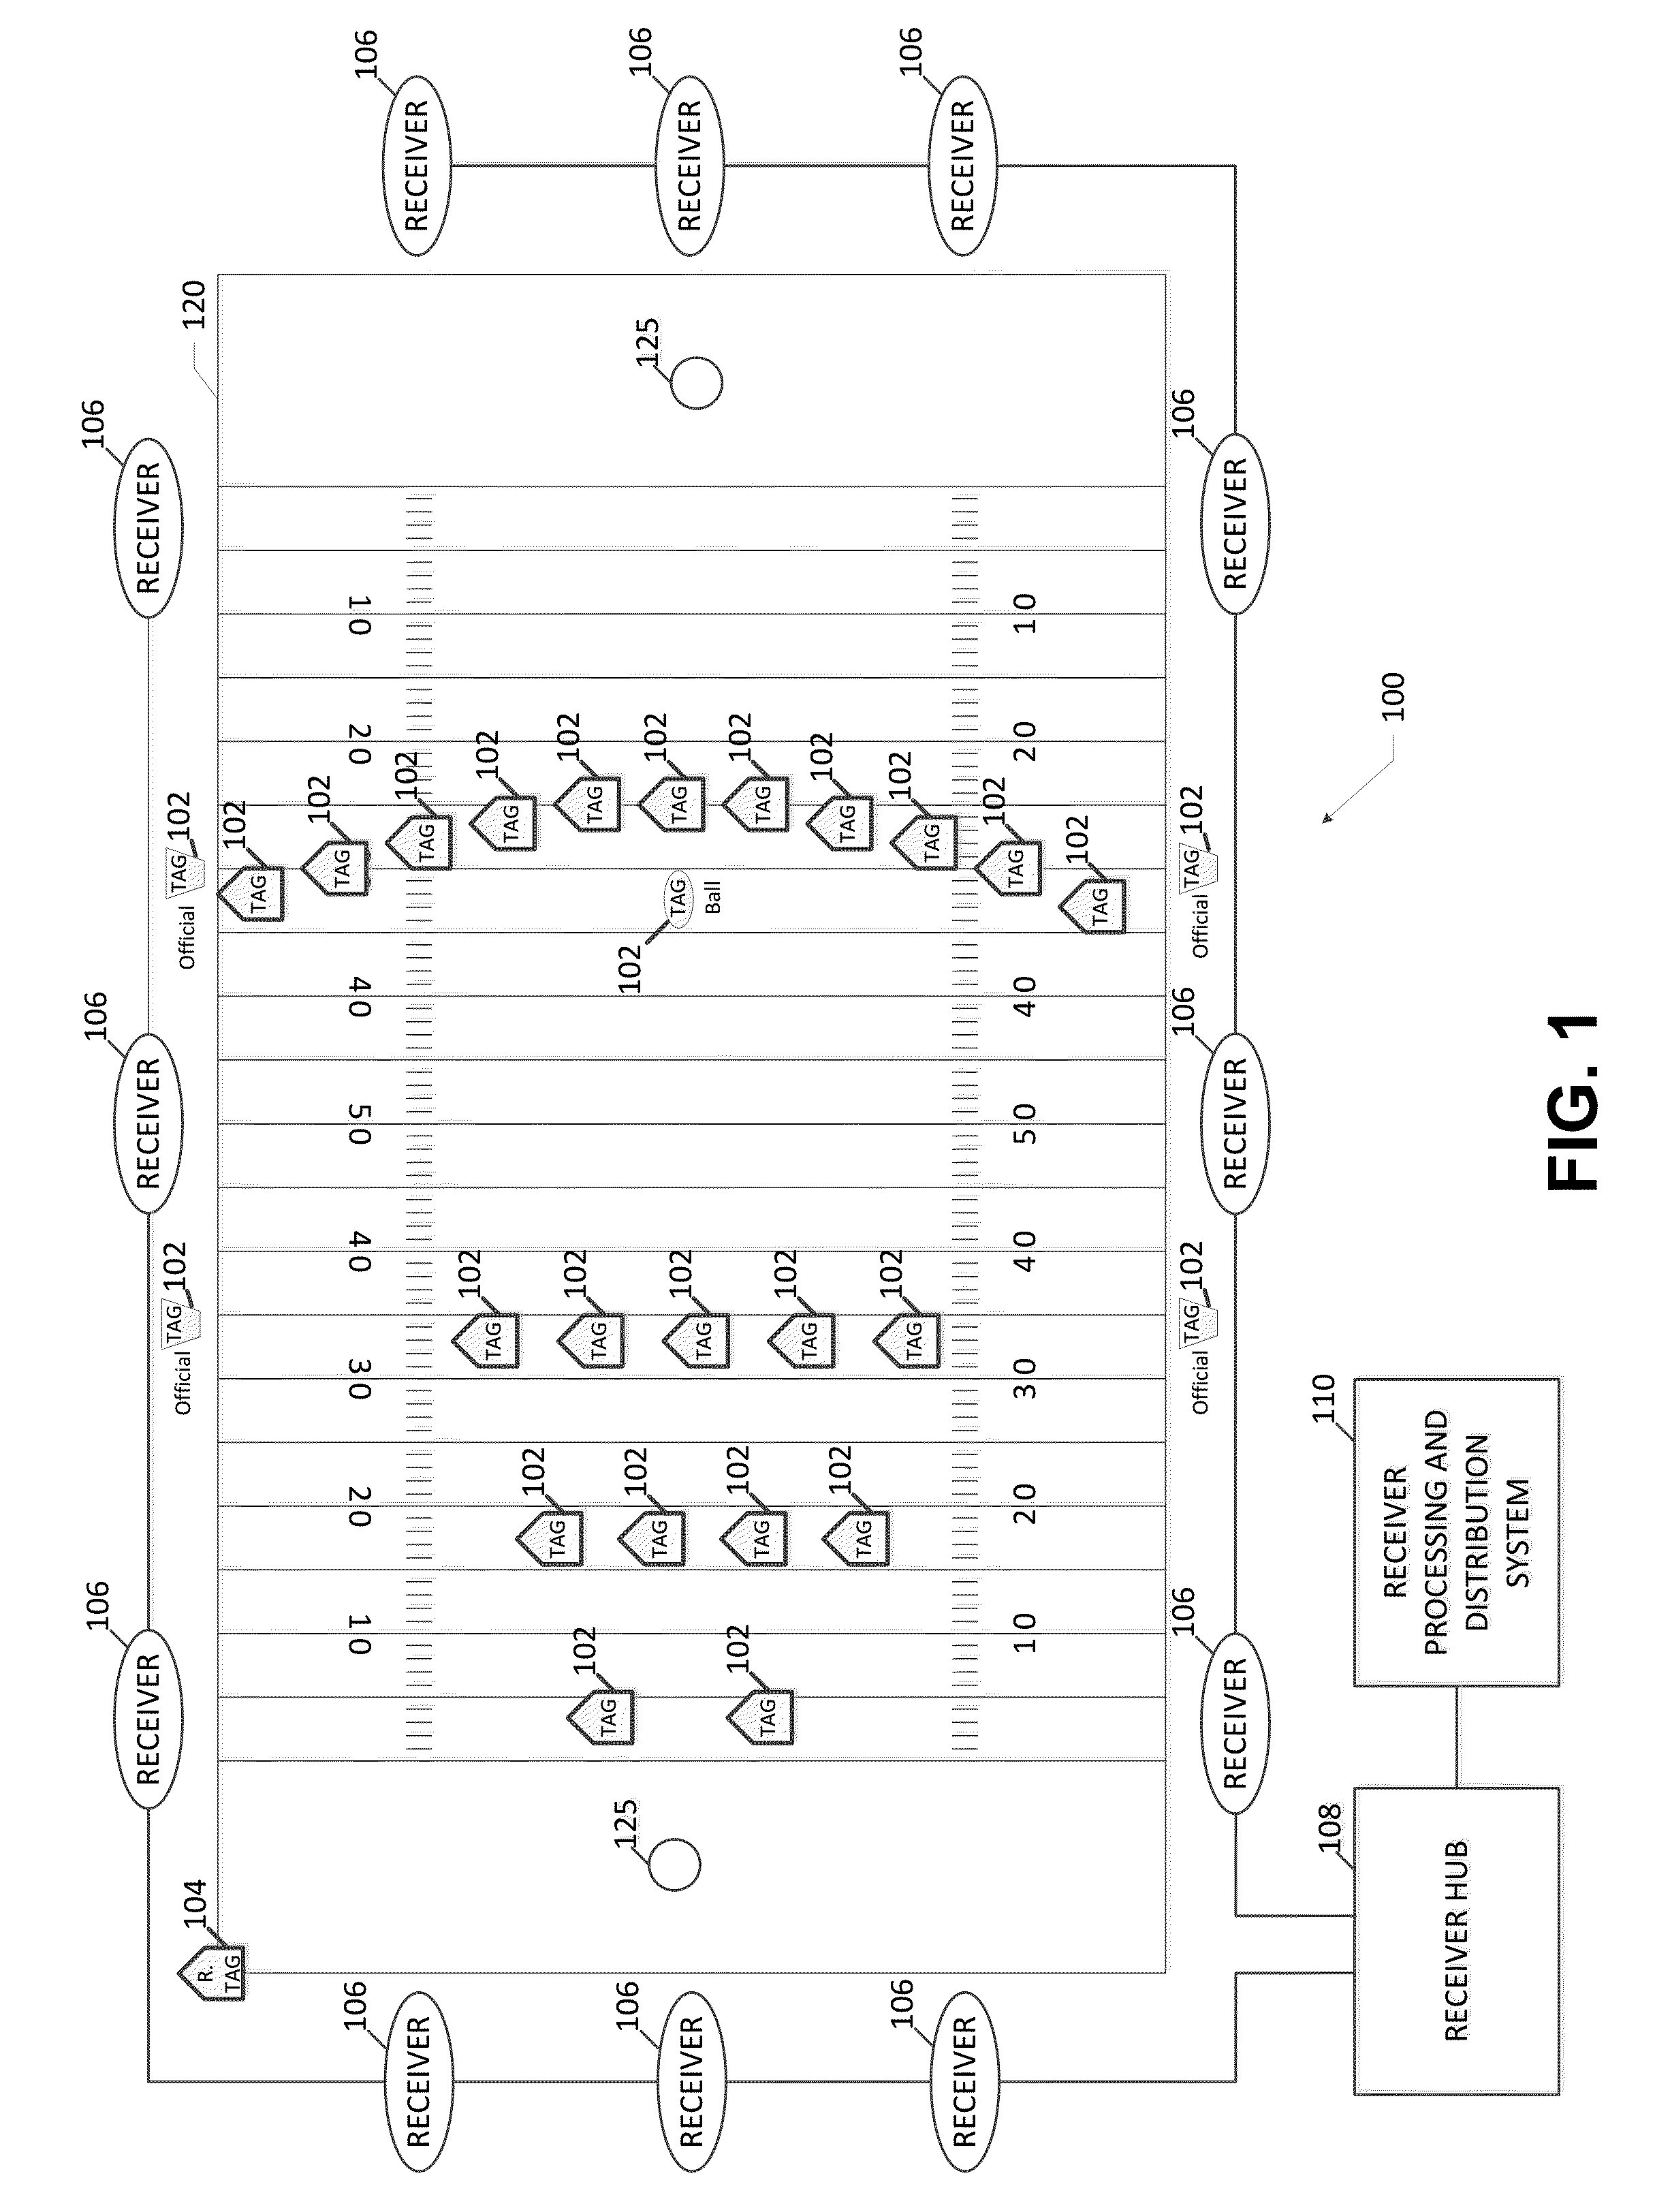 Systems, apparatus and methods for variable rate ultra-wideband communications